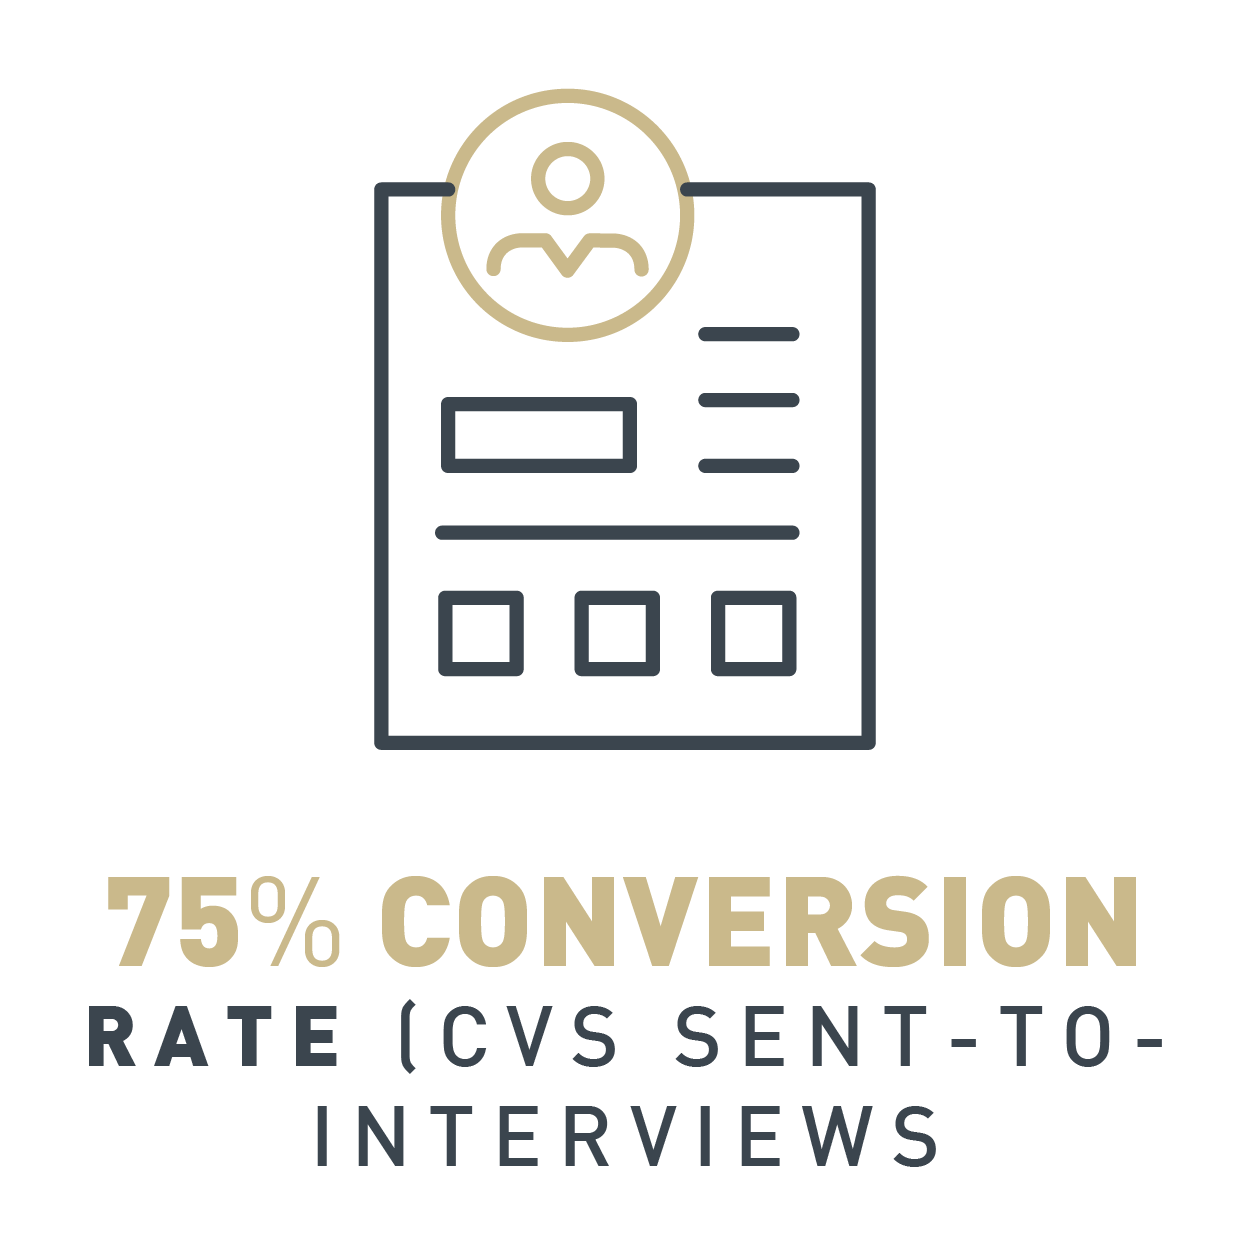 75% conversion rate for the CV's that were sent to interviews